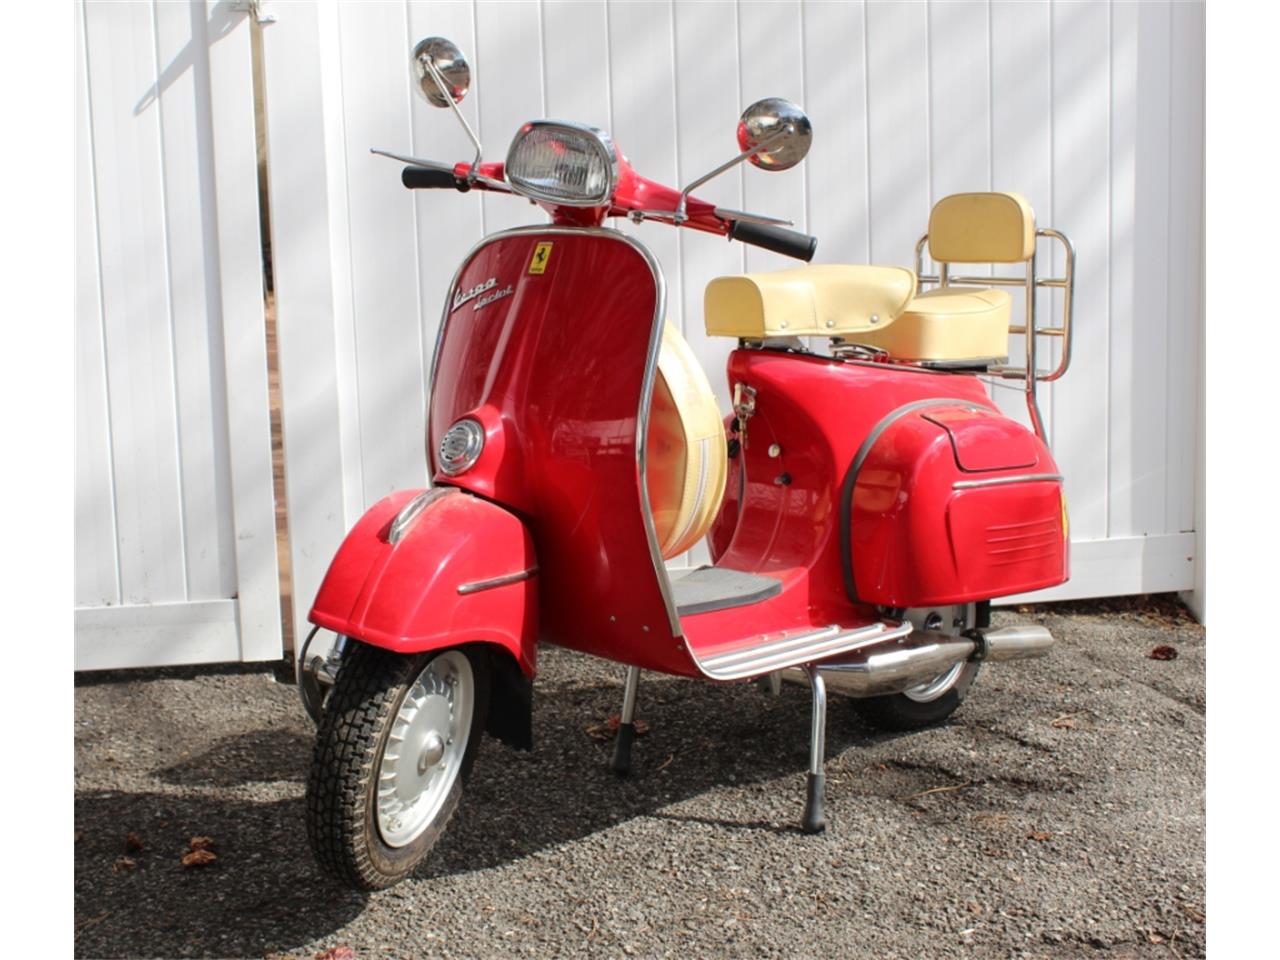 For Sale at Auction: 1967 Vespa Scooter for sale in Billings, MT